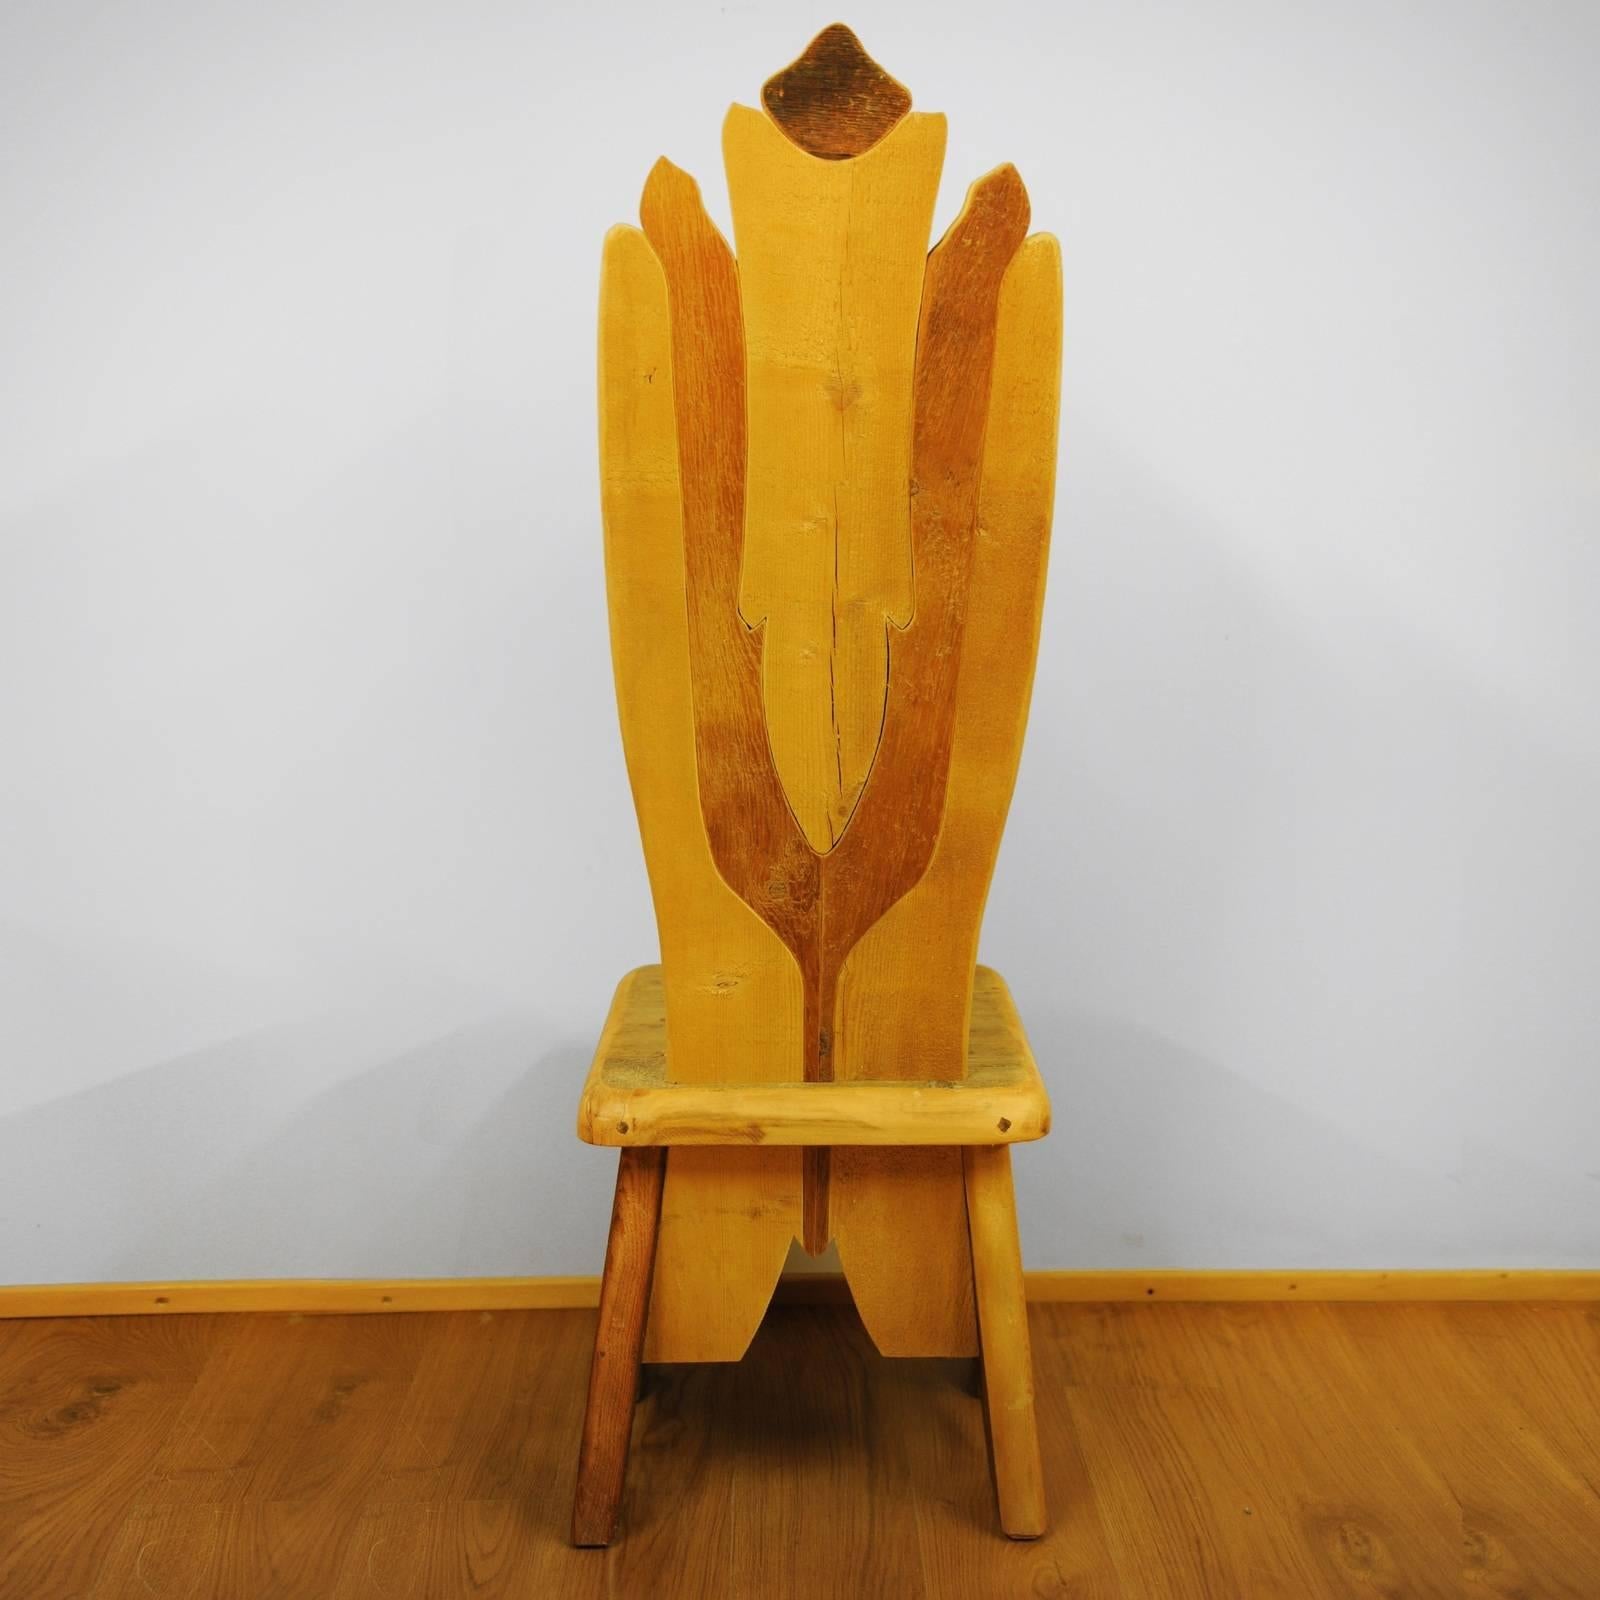 Like an elongated flower opening its petals to the sun, the stunning profile of this chair will add grace and character to a modern or rustic home, either as accent or dining chair. Crafted using fir, Swiss pine, pine, and larch coming from the